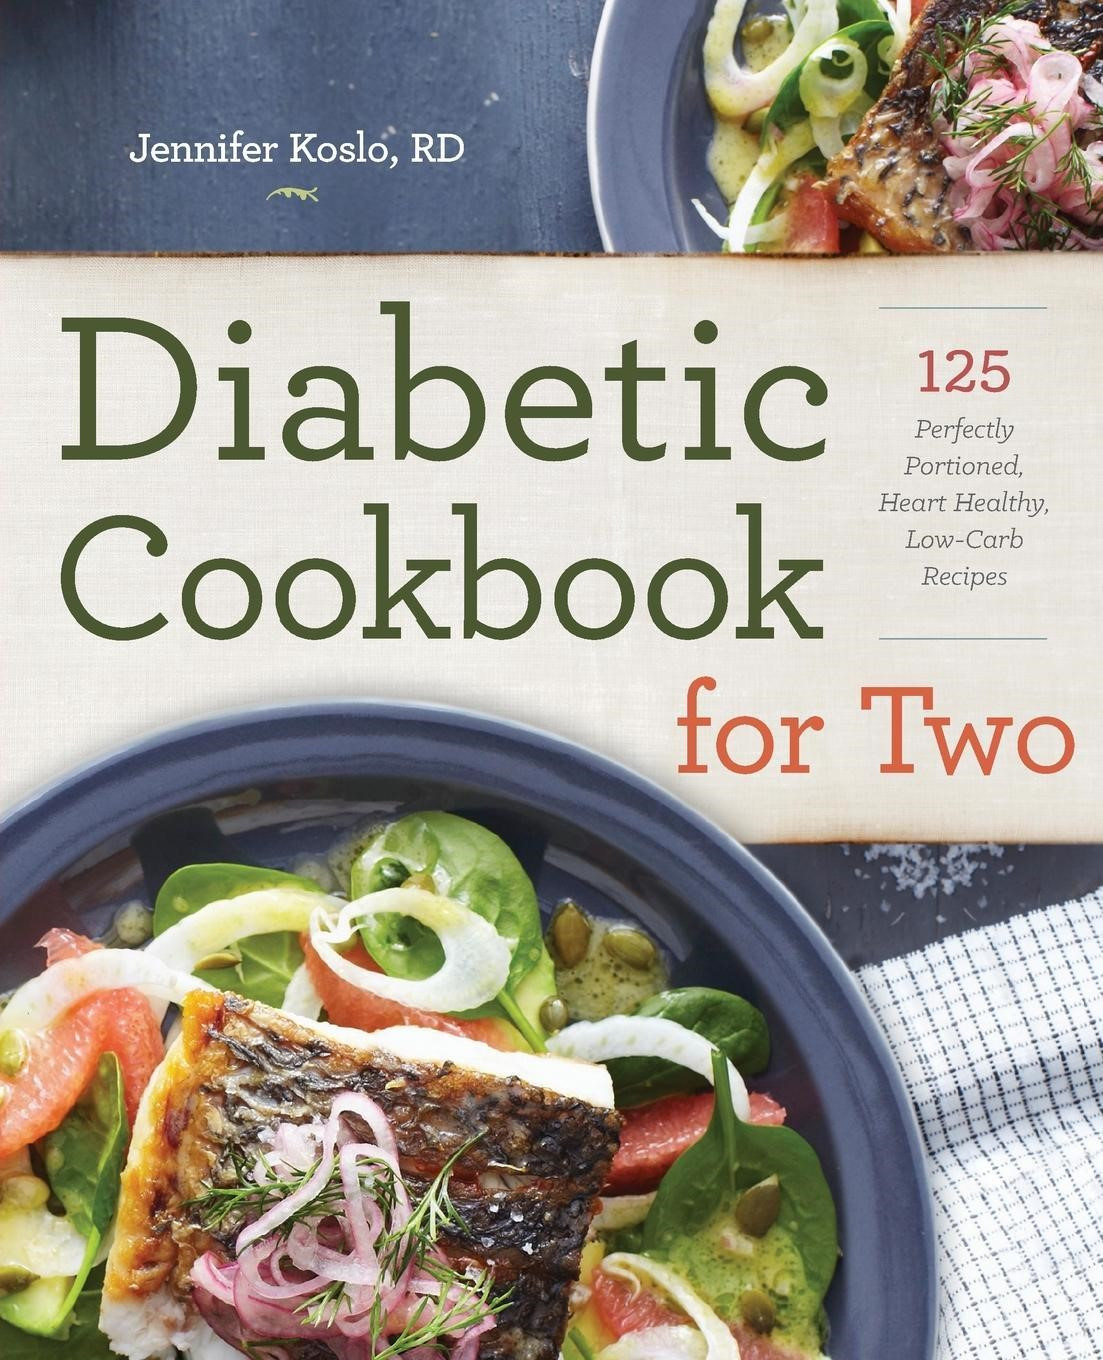 Diabetic And Heart Healthy Recipes
 Diabetic Cookbook for Two 125 Perfectly Portioned Heart